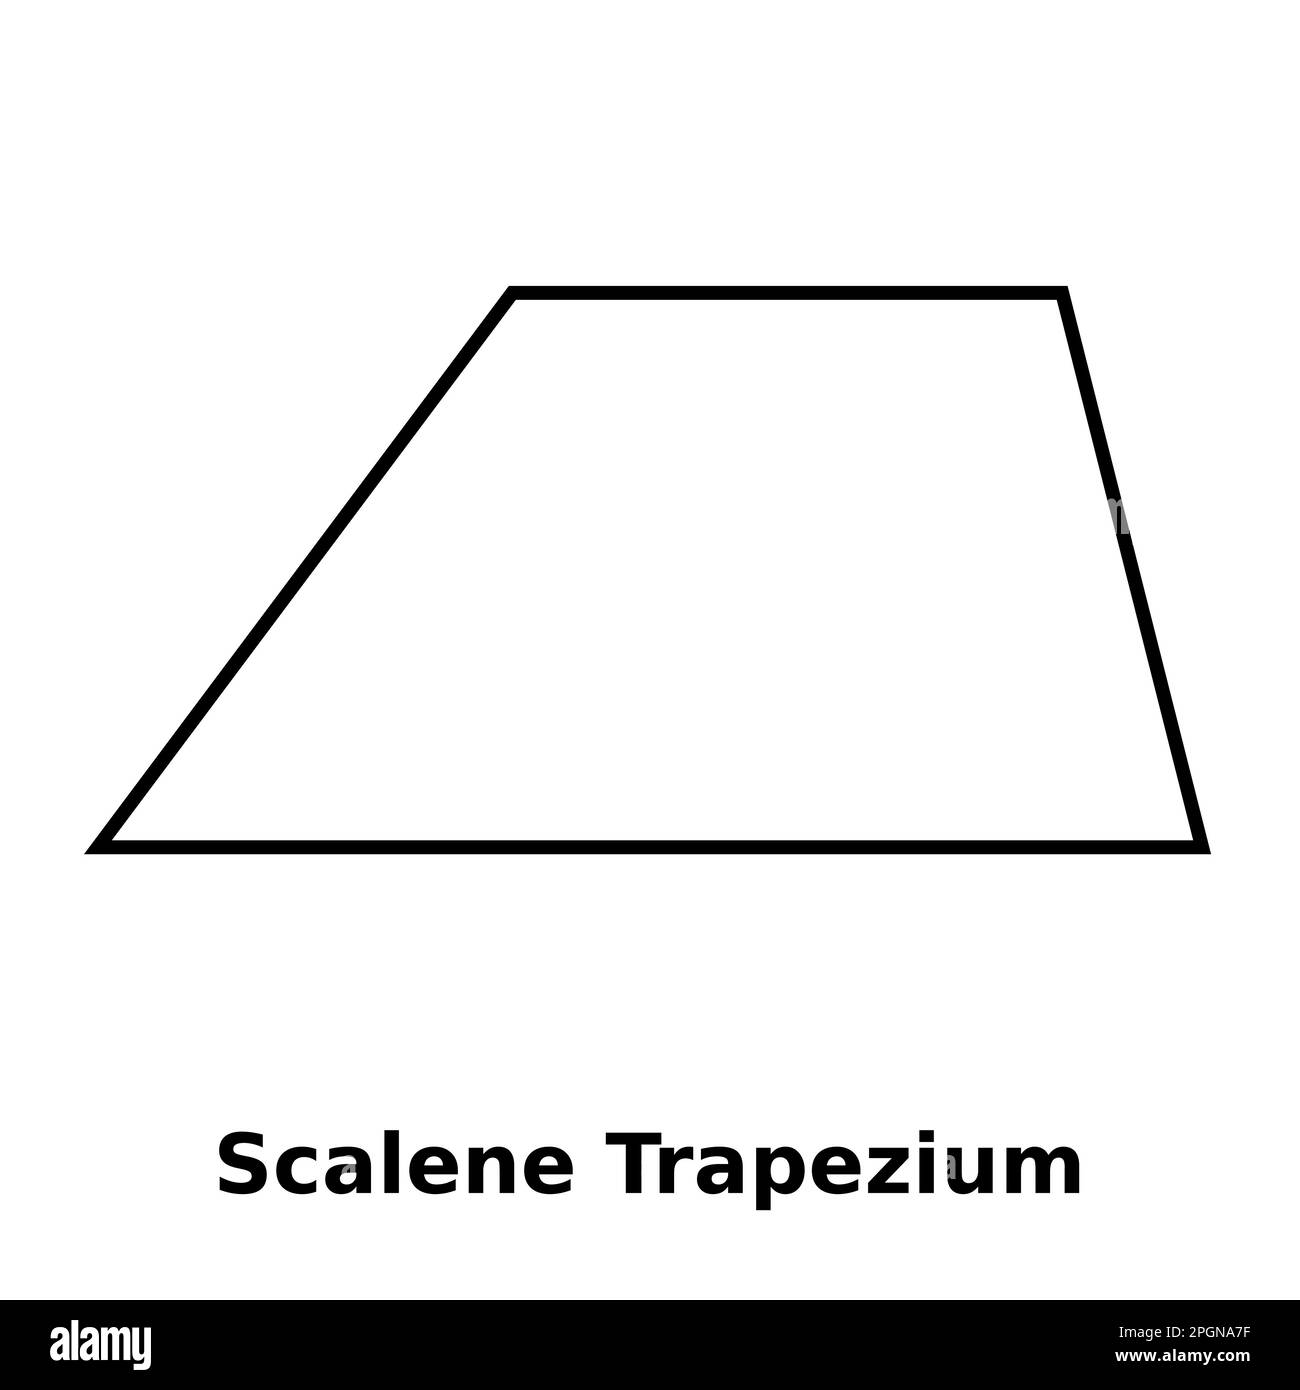 Simple monochrome vector graphic of a scalene trapezium. This is a shape with four sides where two opposite sides are parallel to each other, but the Stock Vector